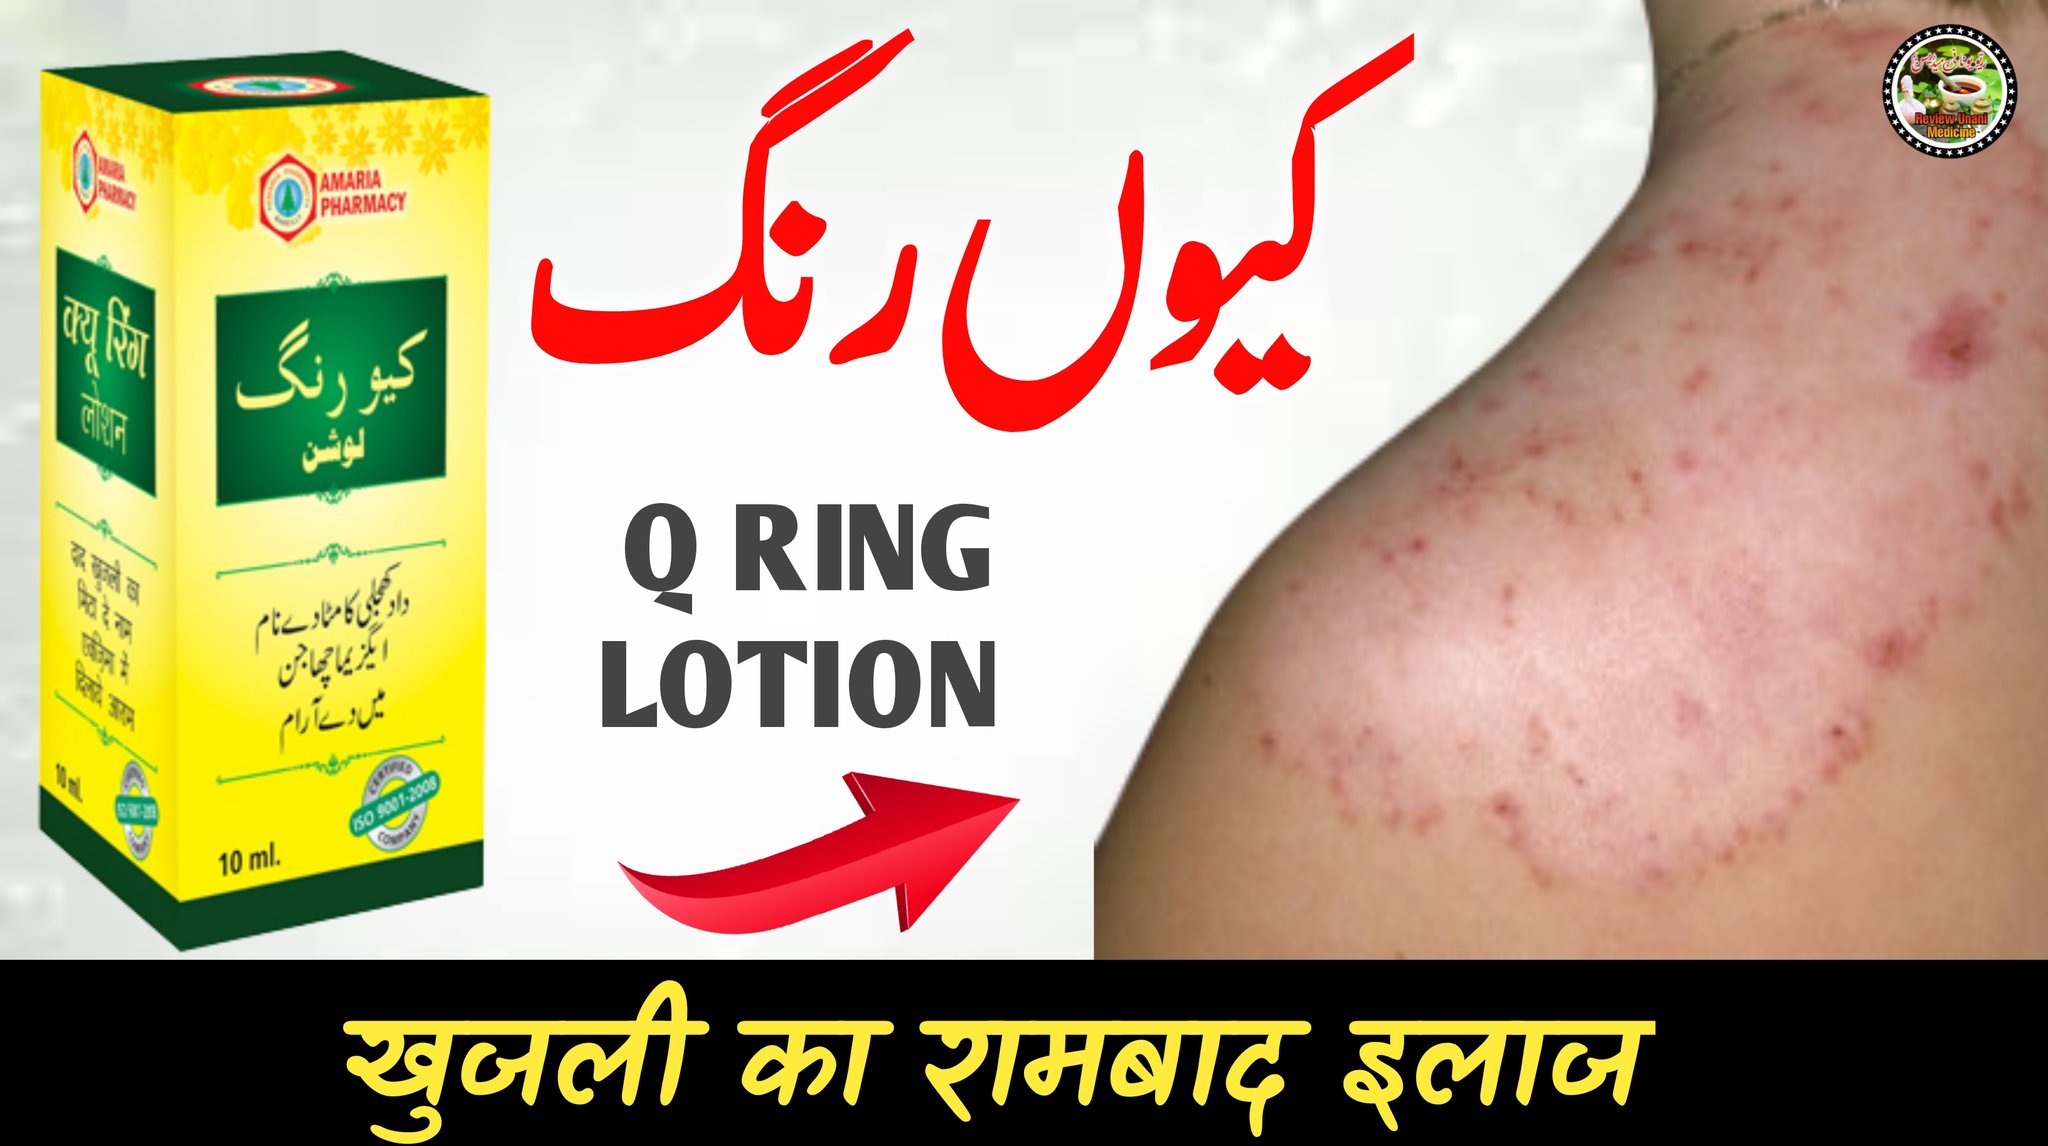 Q Ring Lotion - YouTube